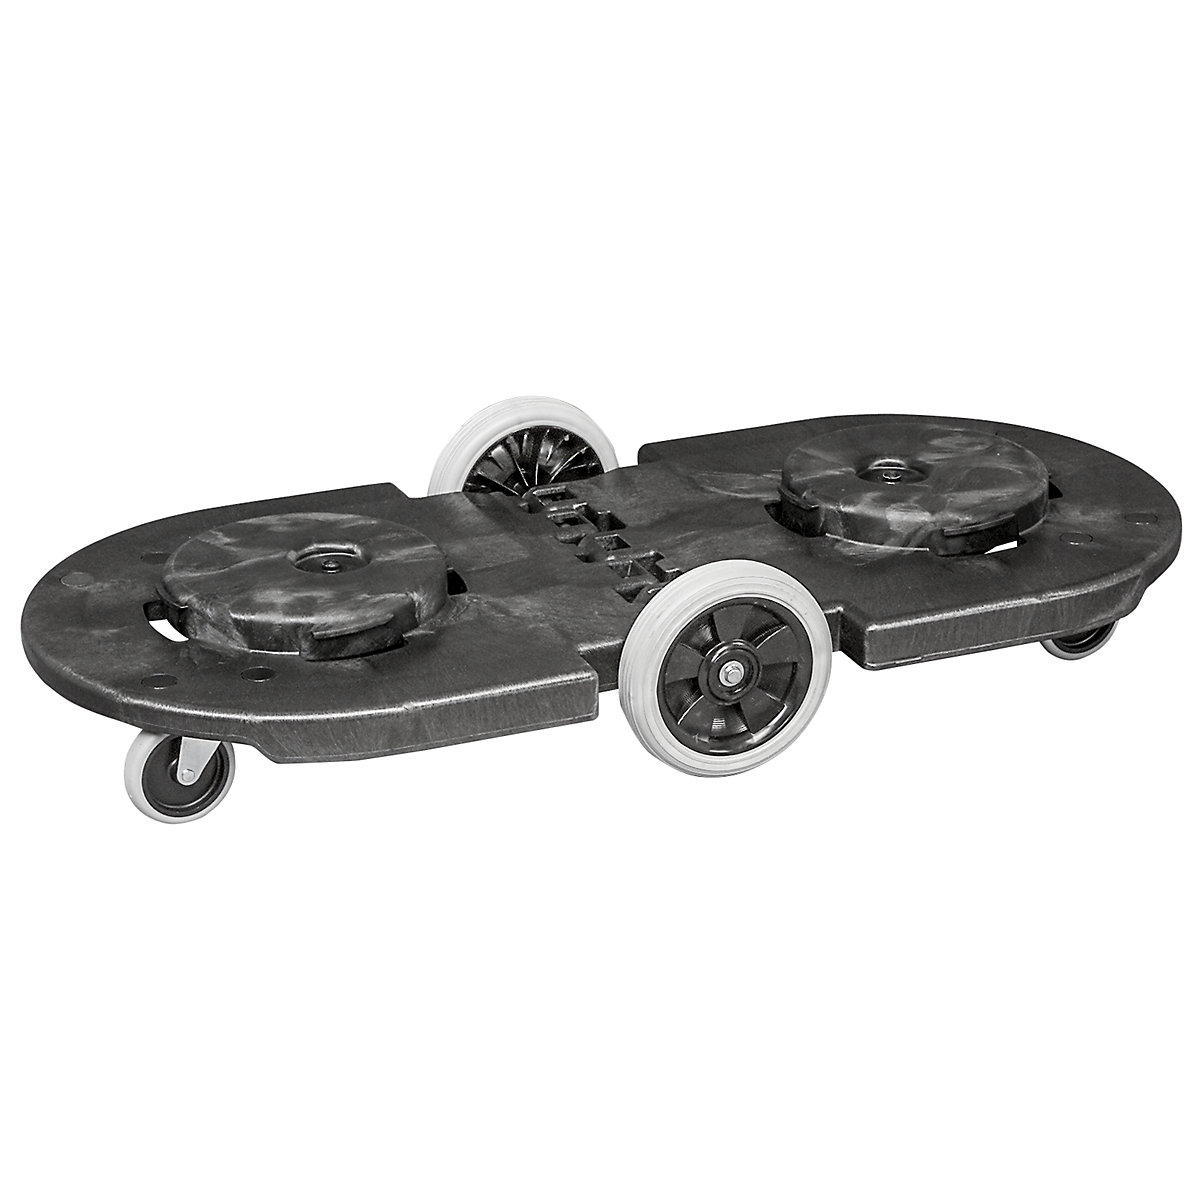 BRUTE® transport dolly/wheeled base - Rubbermaid